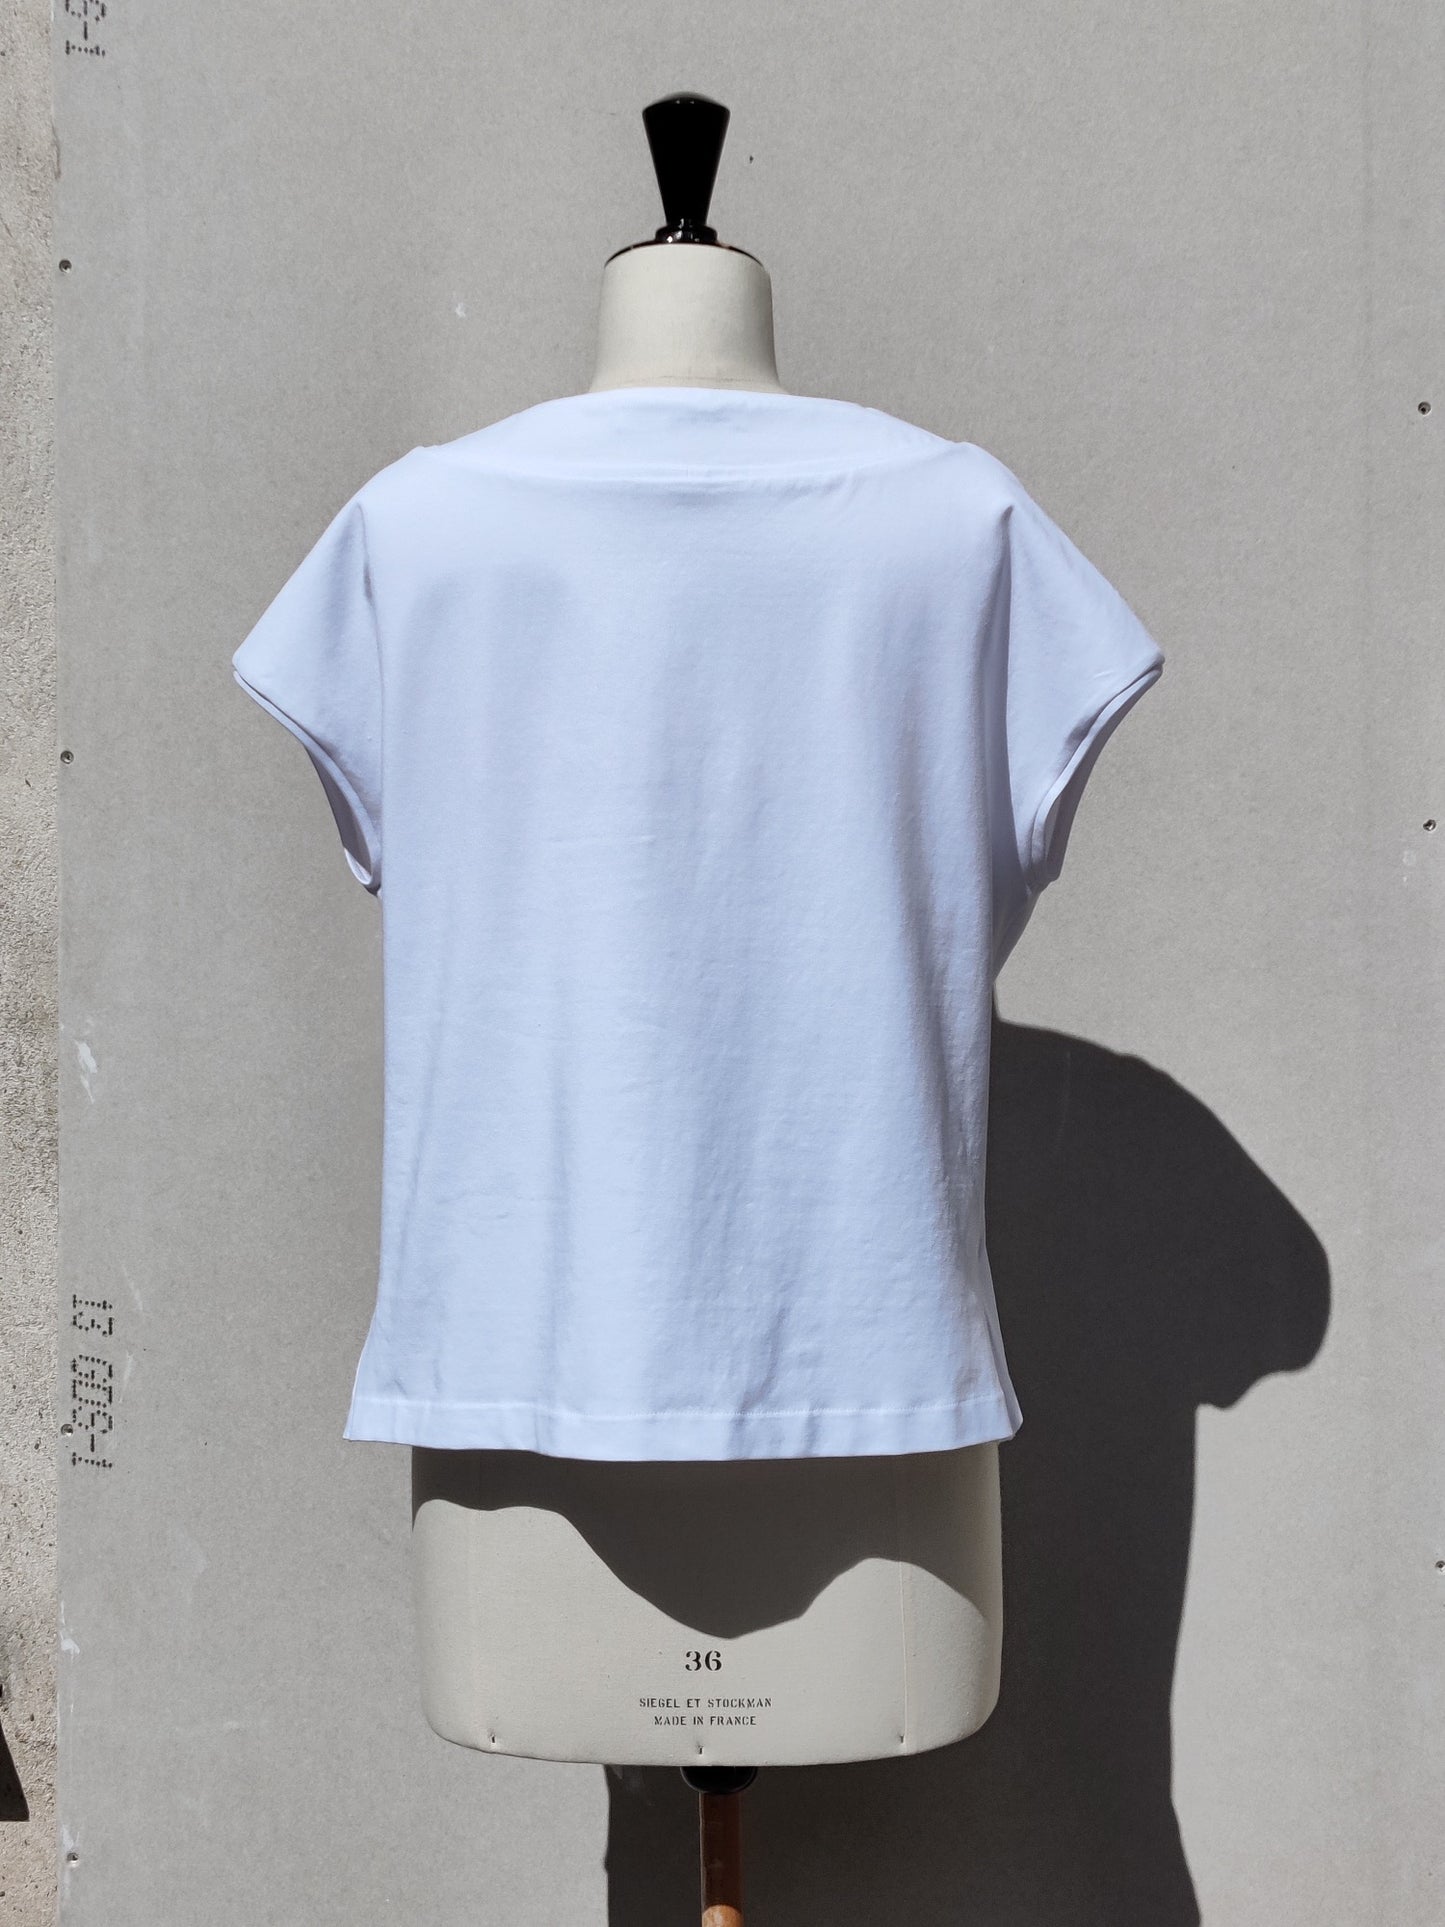 Alberti t-shirt white, back view, on a dummy